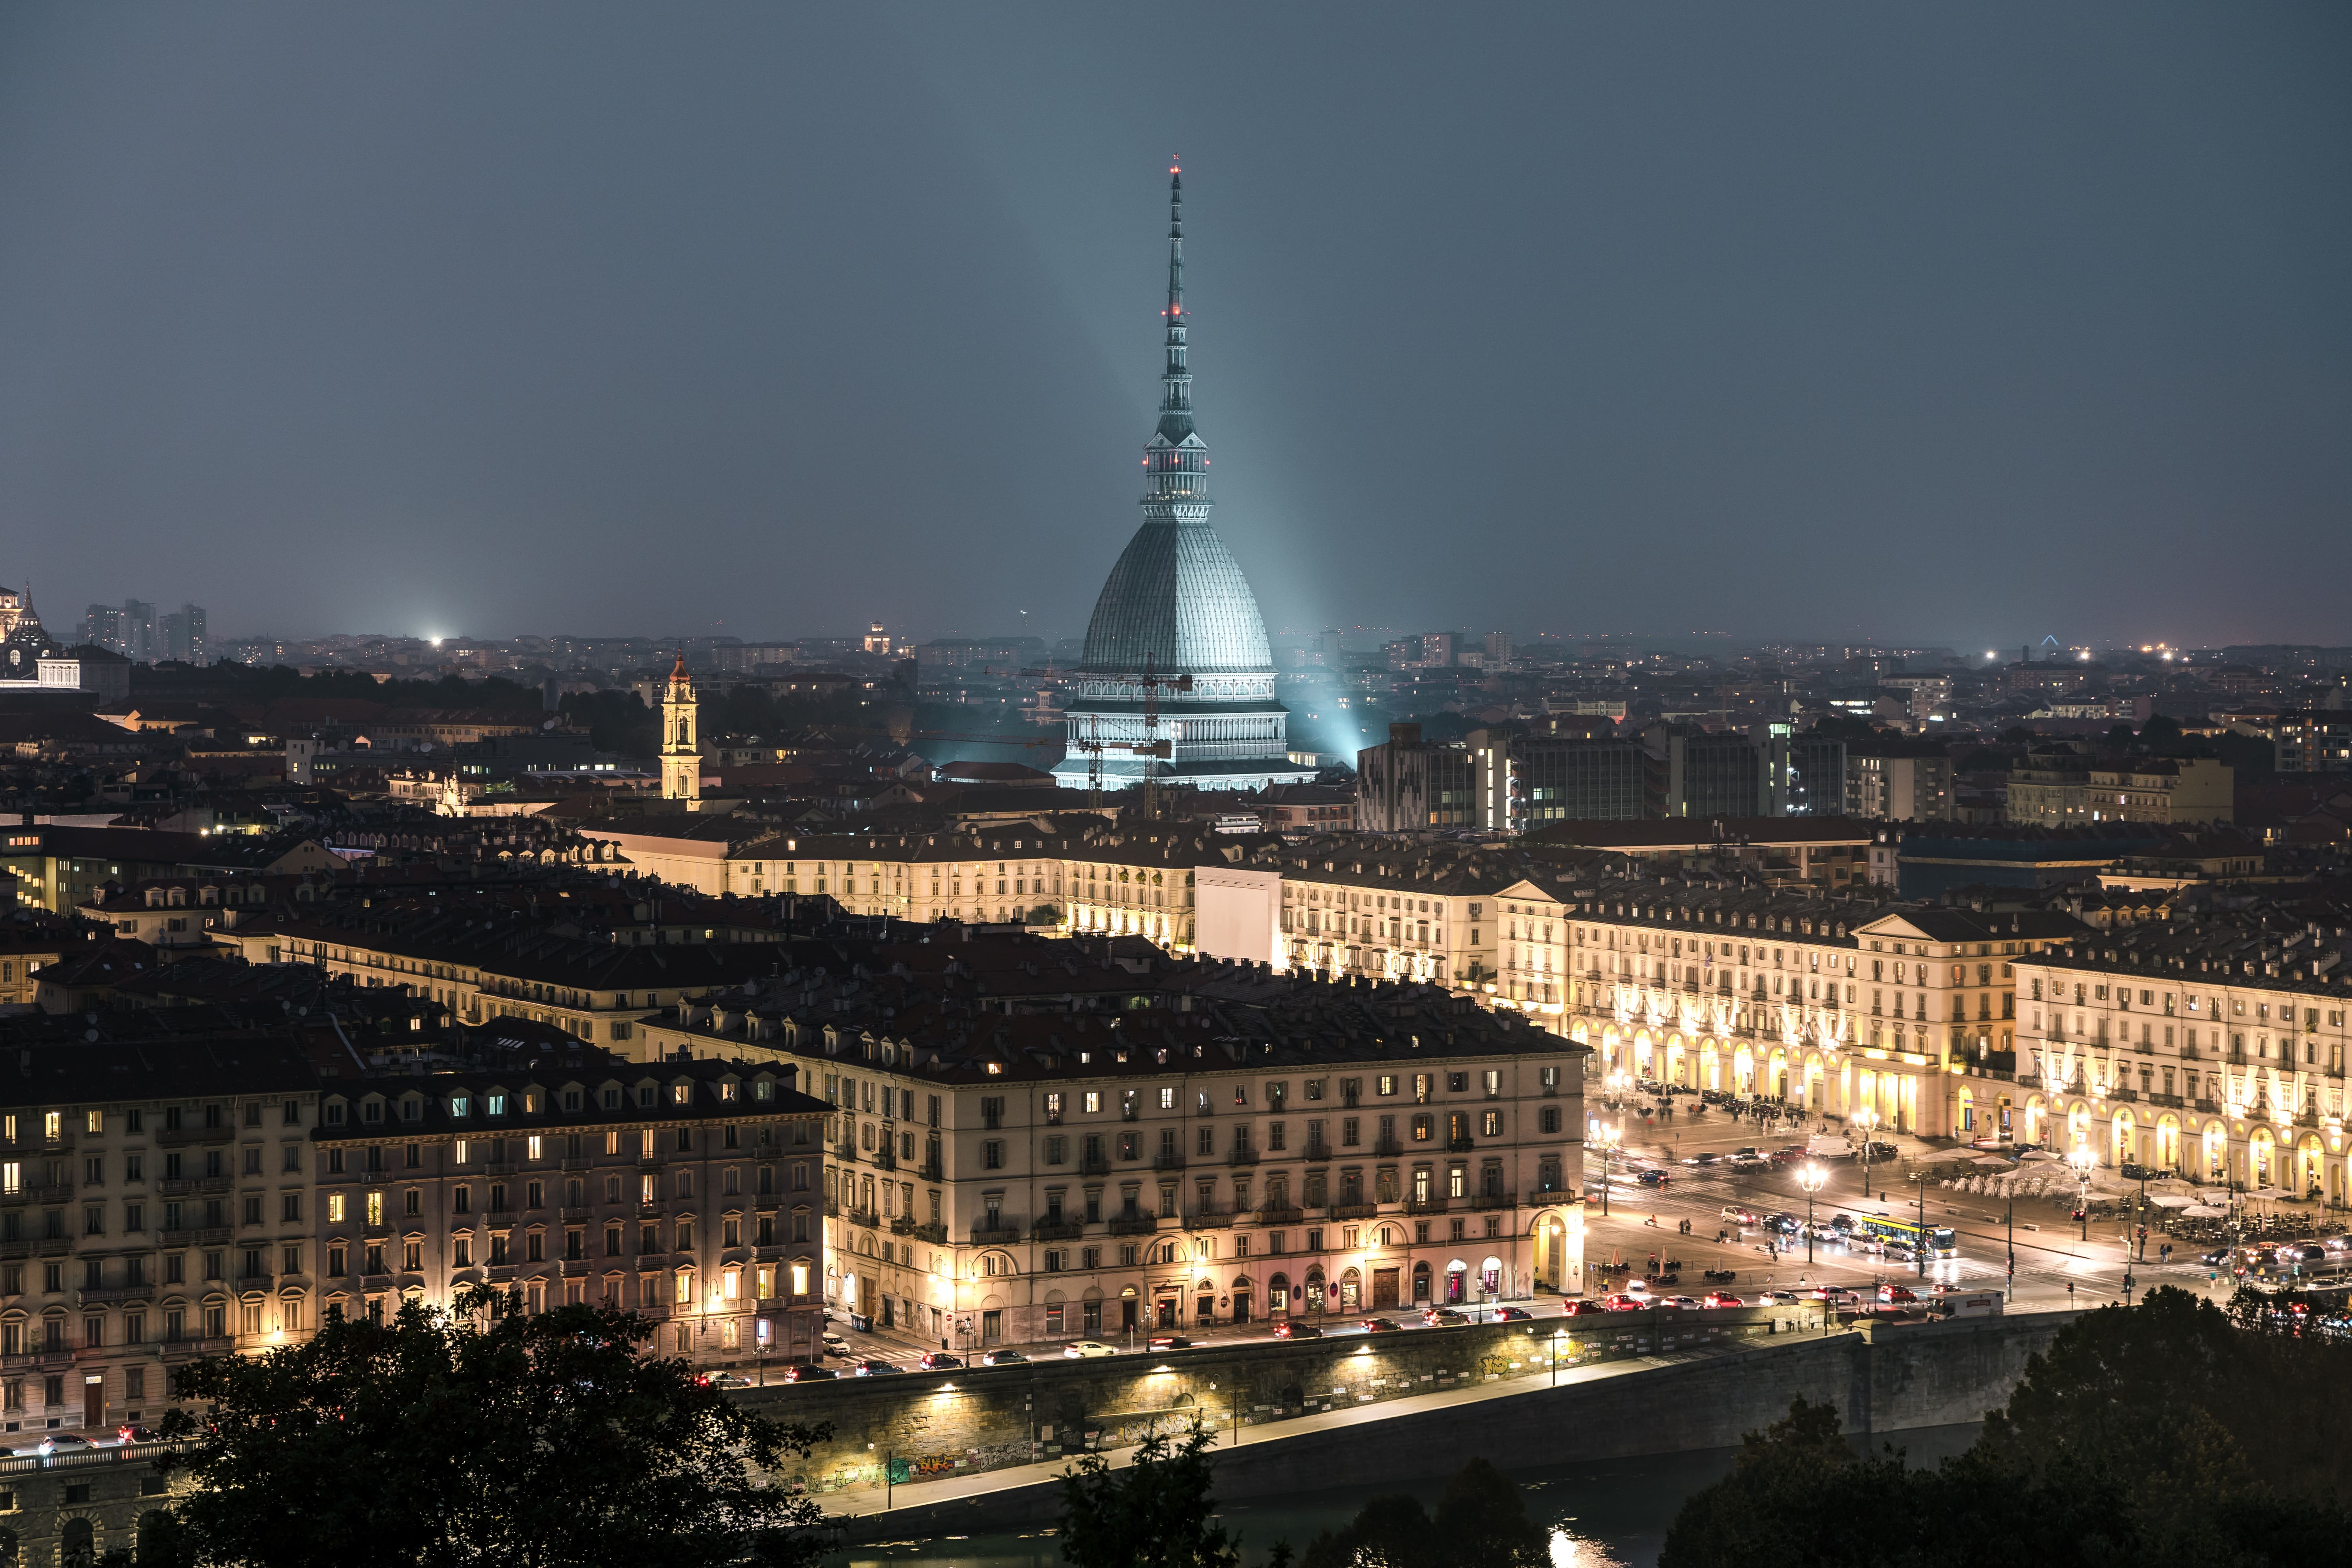 The city of Turin at sunset, splendid view of the Mole Antonelliana when the city lights up © Fernando - stock.adobe.com